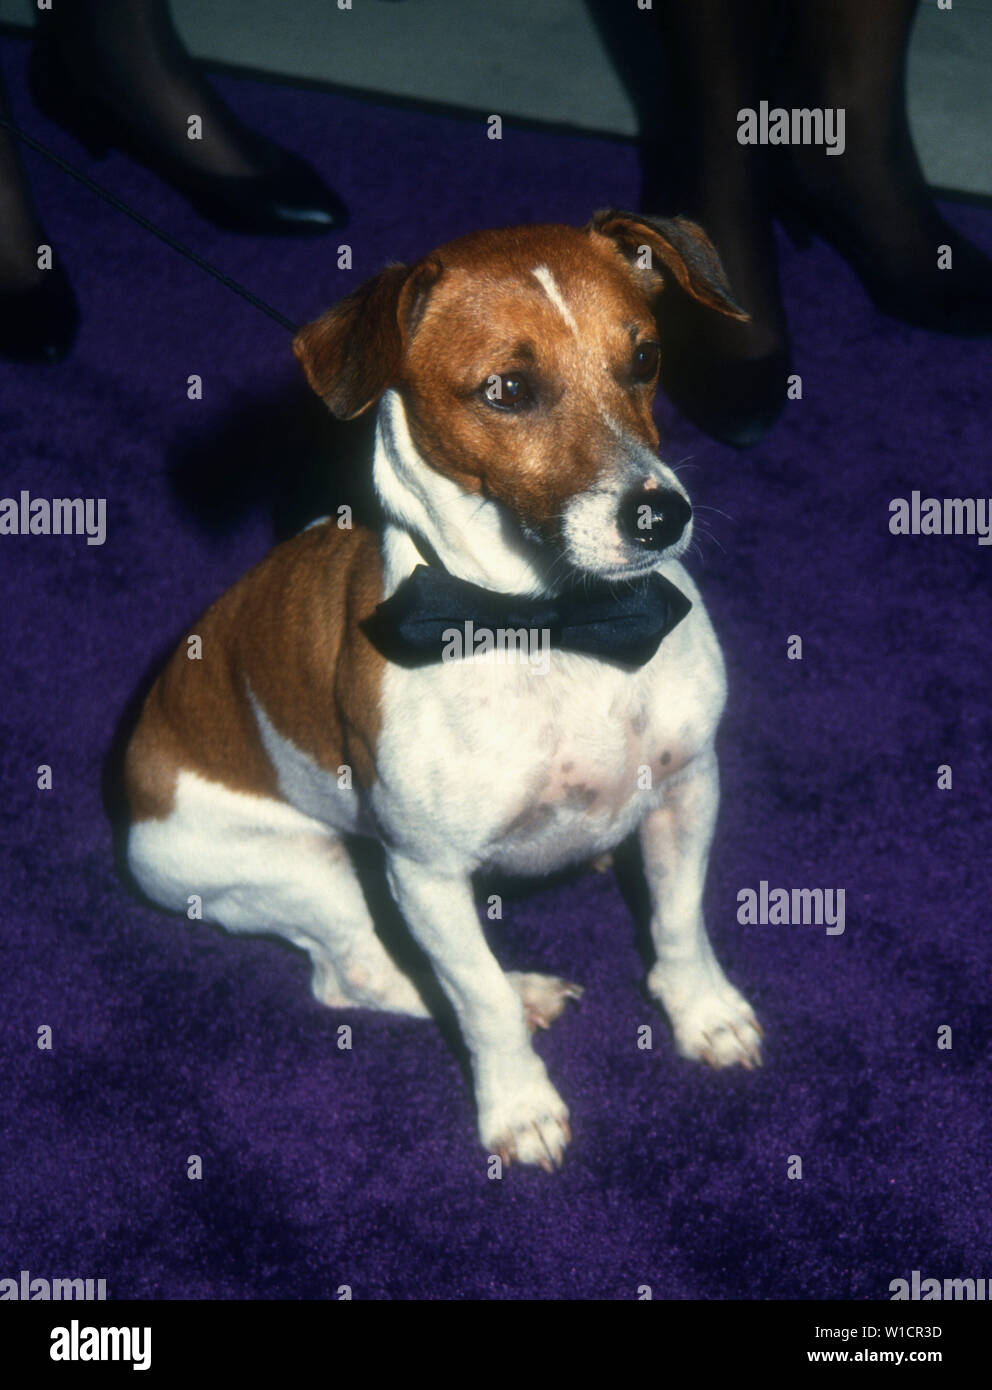 Beverly Hills, California, USA 28th July 1994 Barkley the Dog attends New Line Cinema's 'The Mask' Premiere on July 28, 1994 at The Academy Theatre in Beverly Hills, California, USA. Photo by Barry King/Alamy Stock Photo Stock Photo